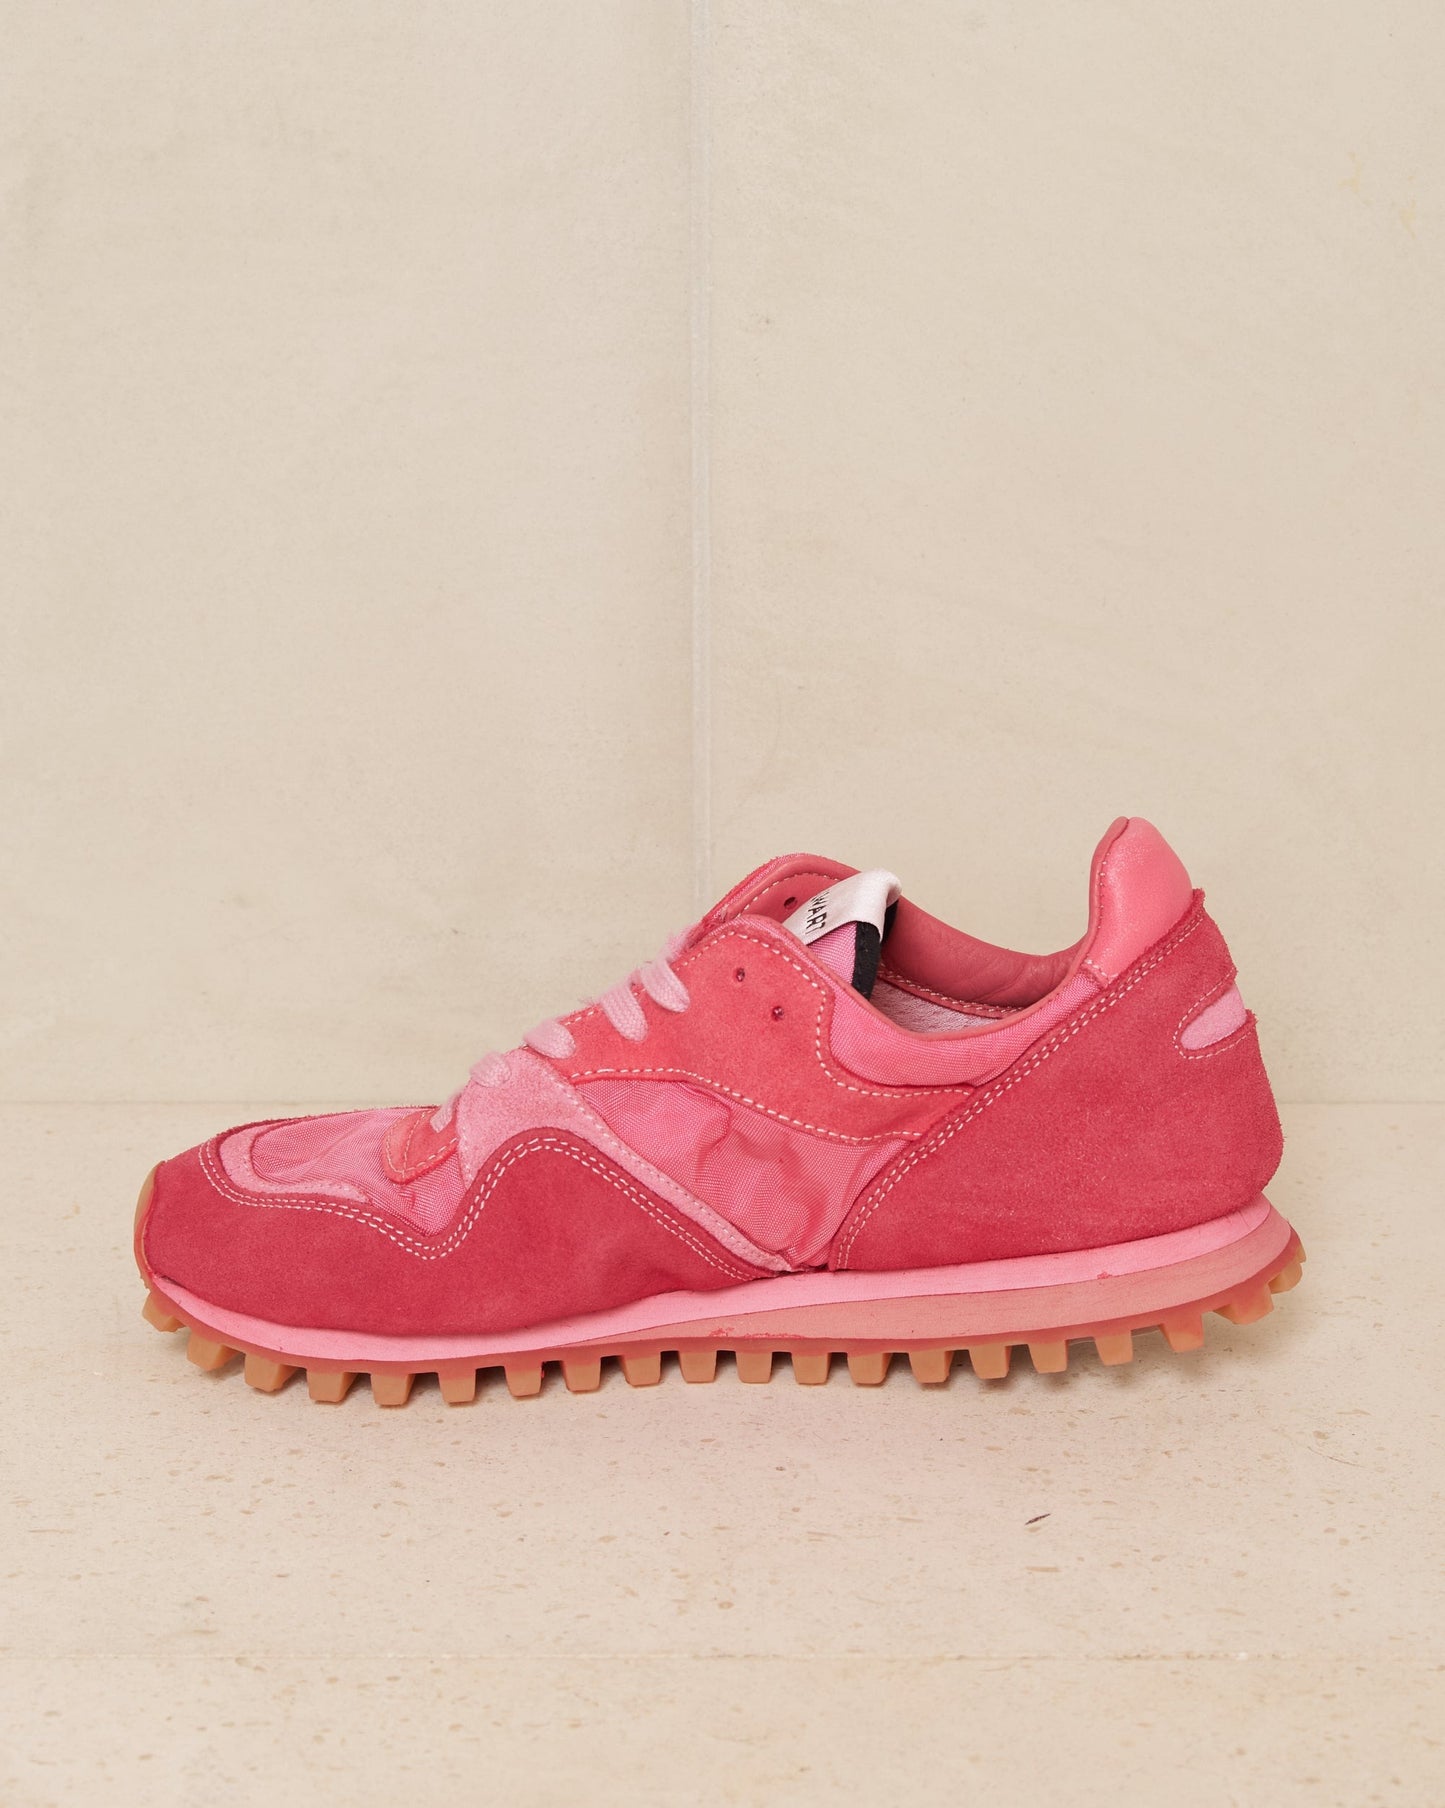 comme des garcons red spalwart sneakers